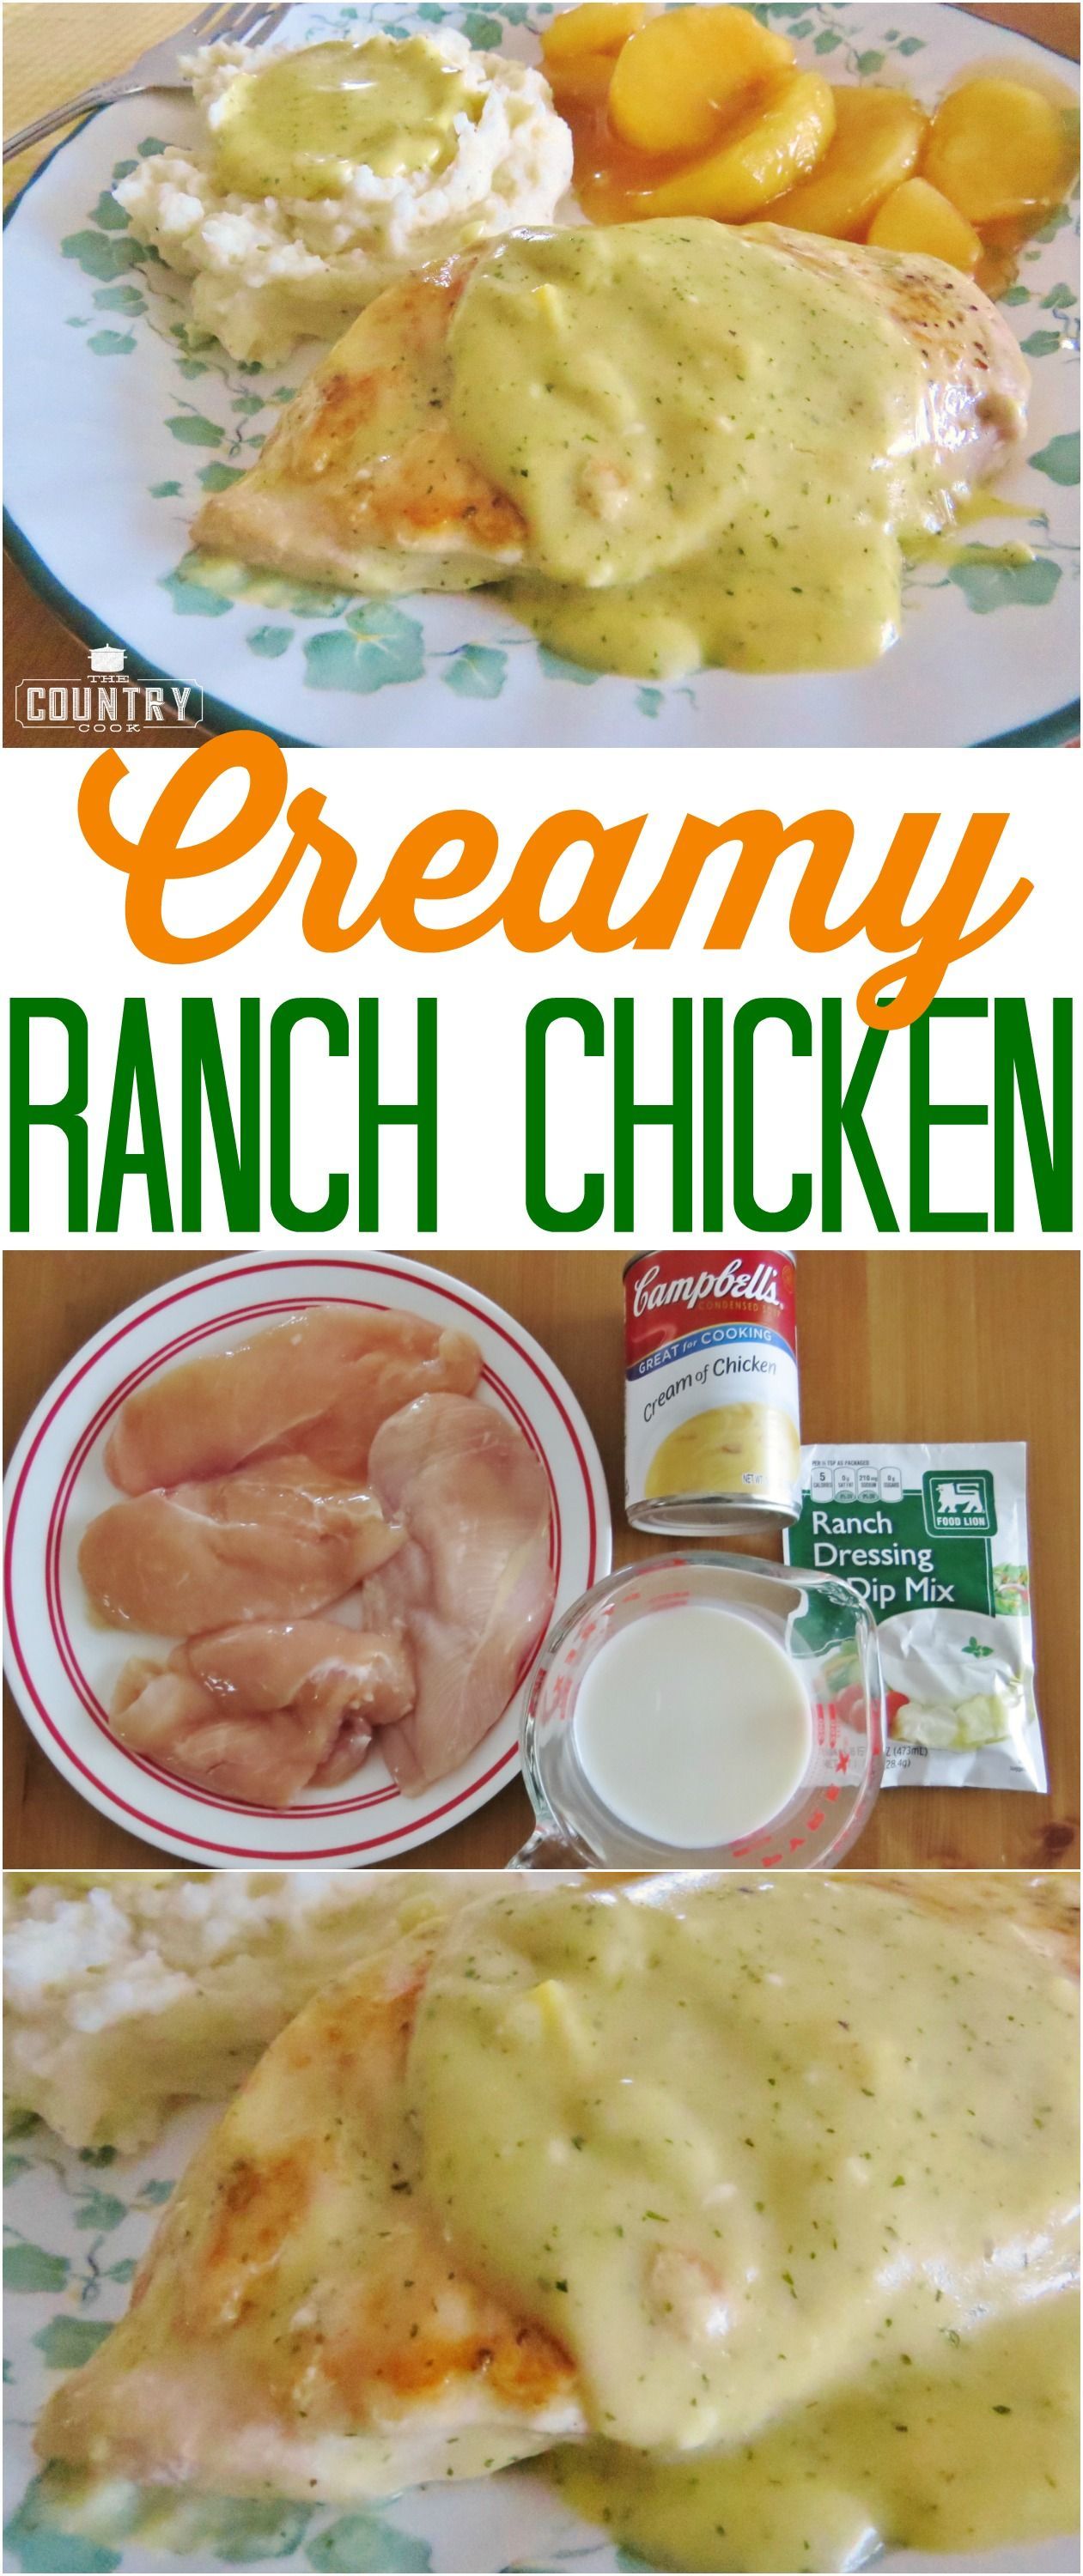 Creamy Ranch Chicken recipe from The Country Cook. Only 4 ingredients!